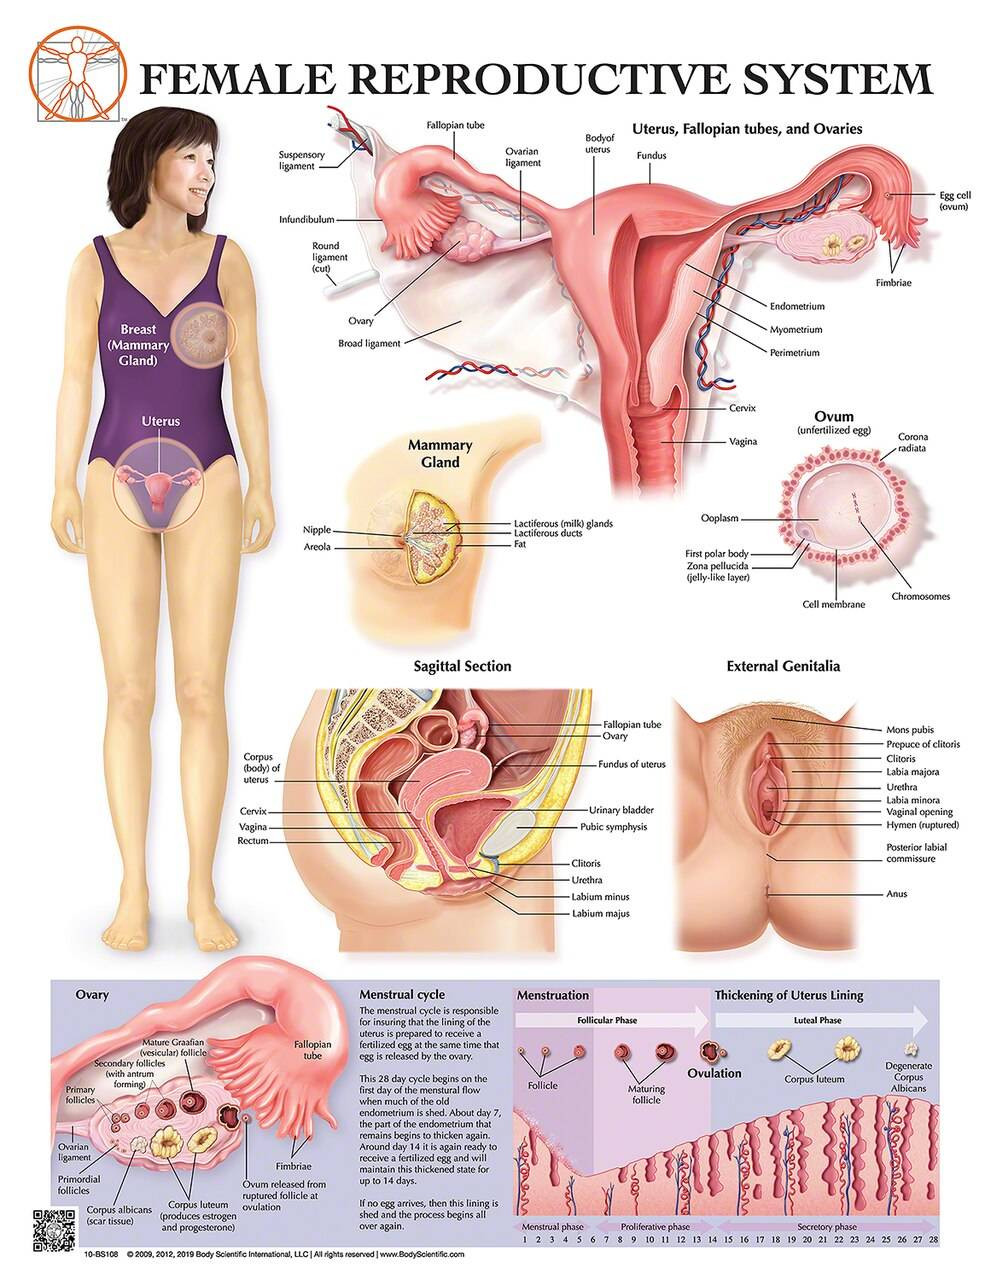 Anatomy Of The Female Reproductive System Laminated Wall Chart With Digital Download Code